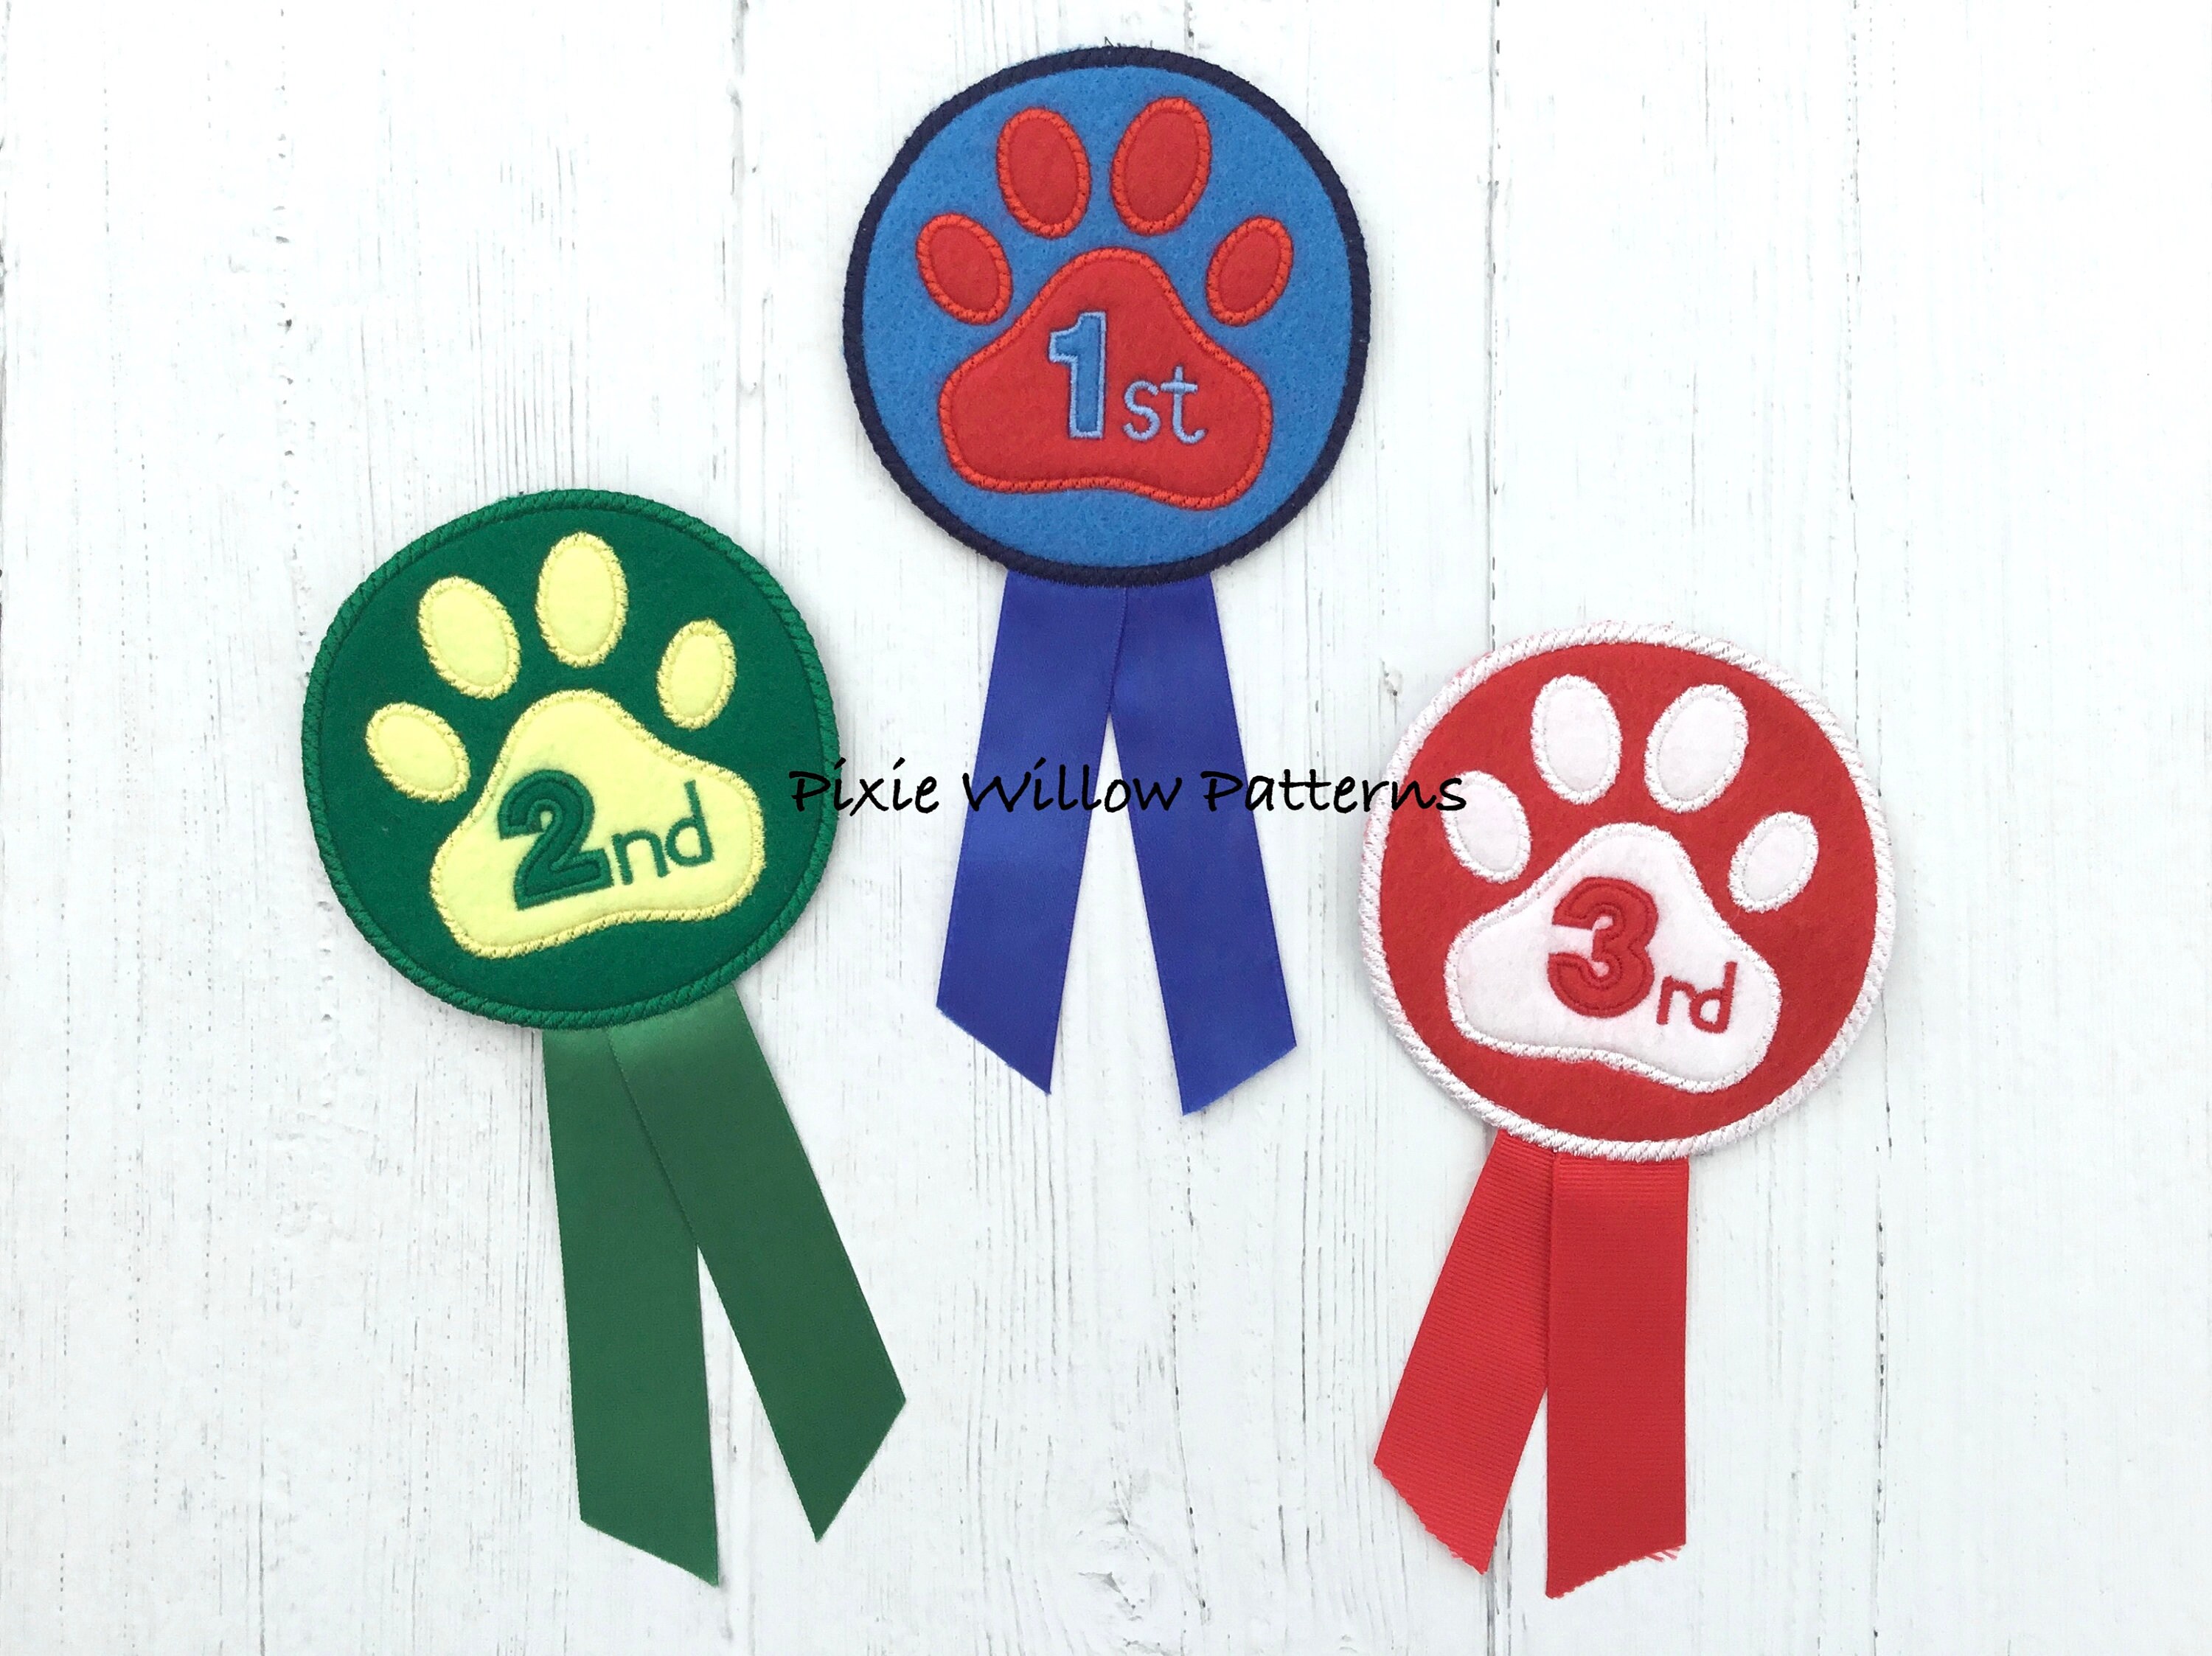 Dog Show Rosettes Winner x 10  FREE Printed Paw Print Tails FREE POSTAGE 